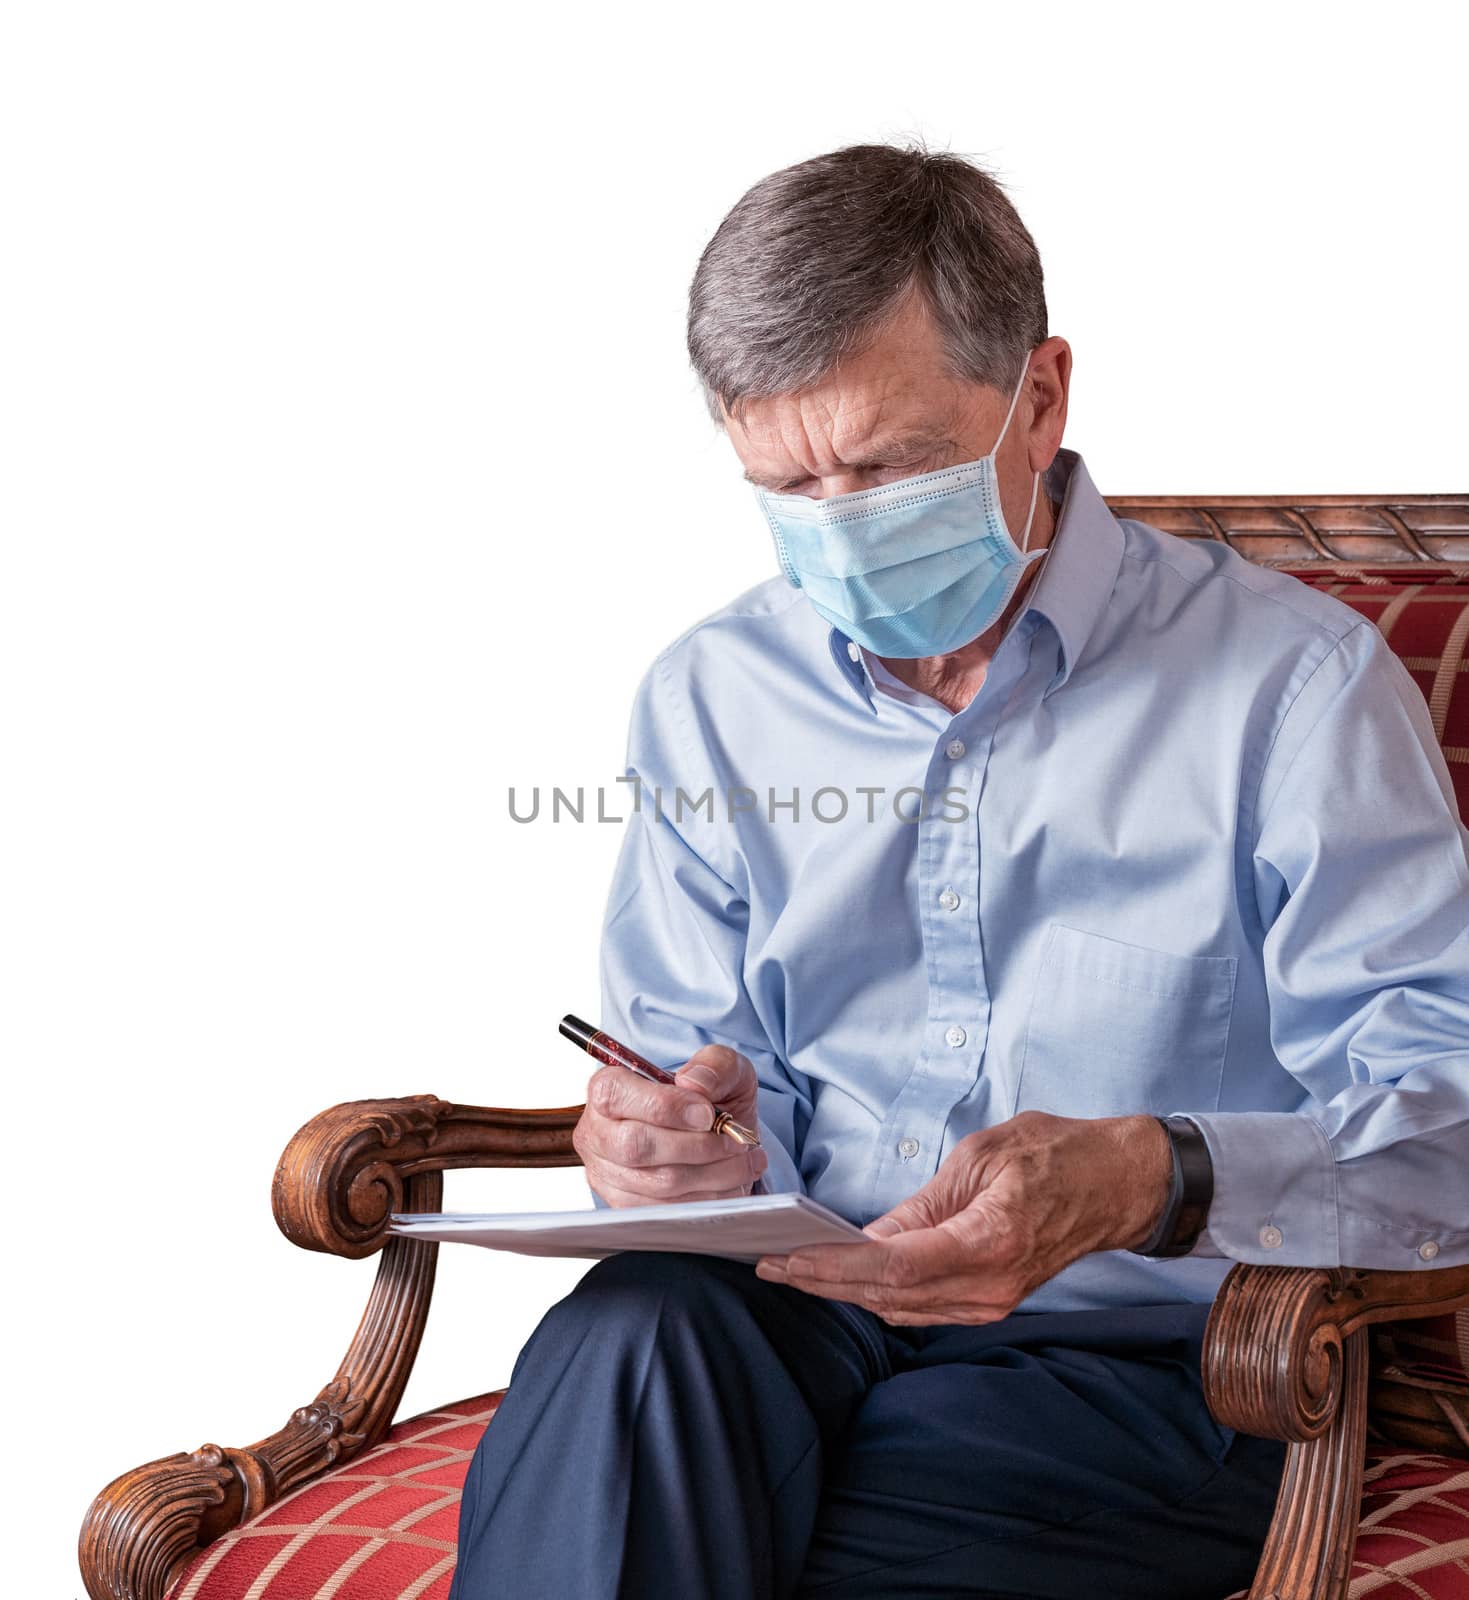 Senior caucasian adult checking a document in hand while seated. He is wearing a face mask against coronavirus and cutout against white